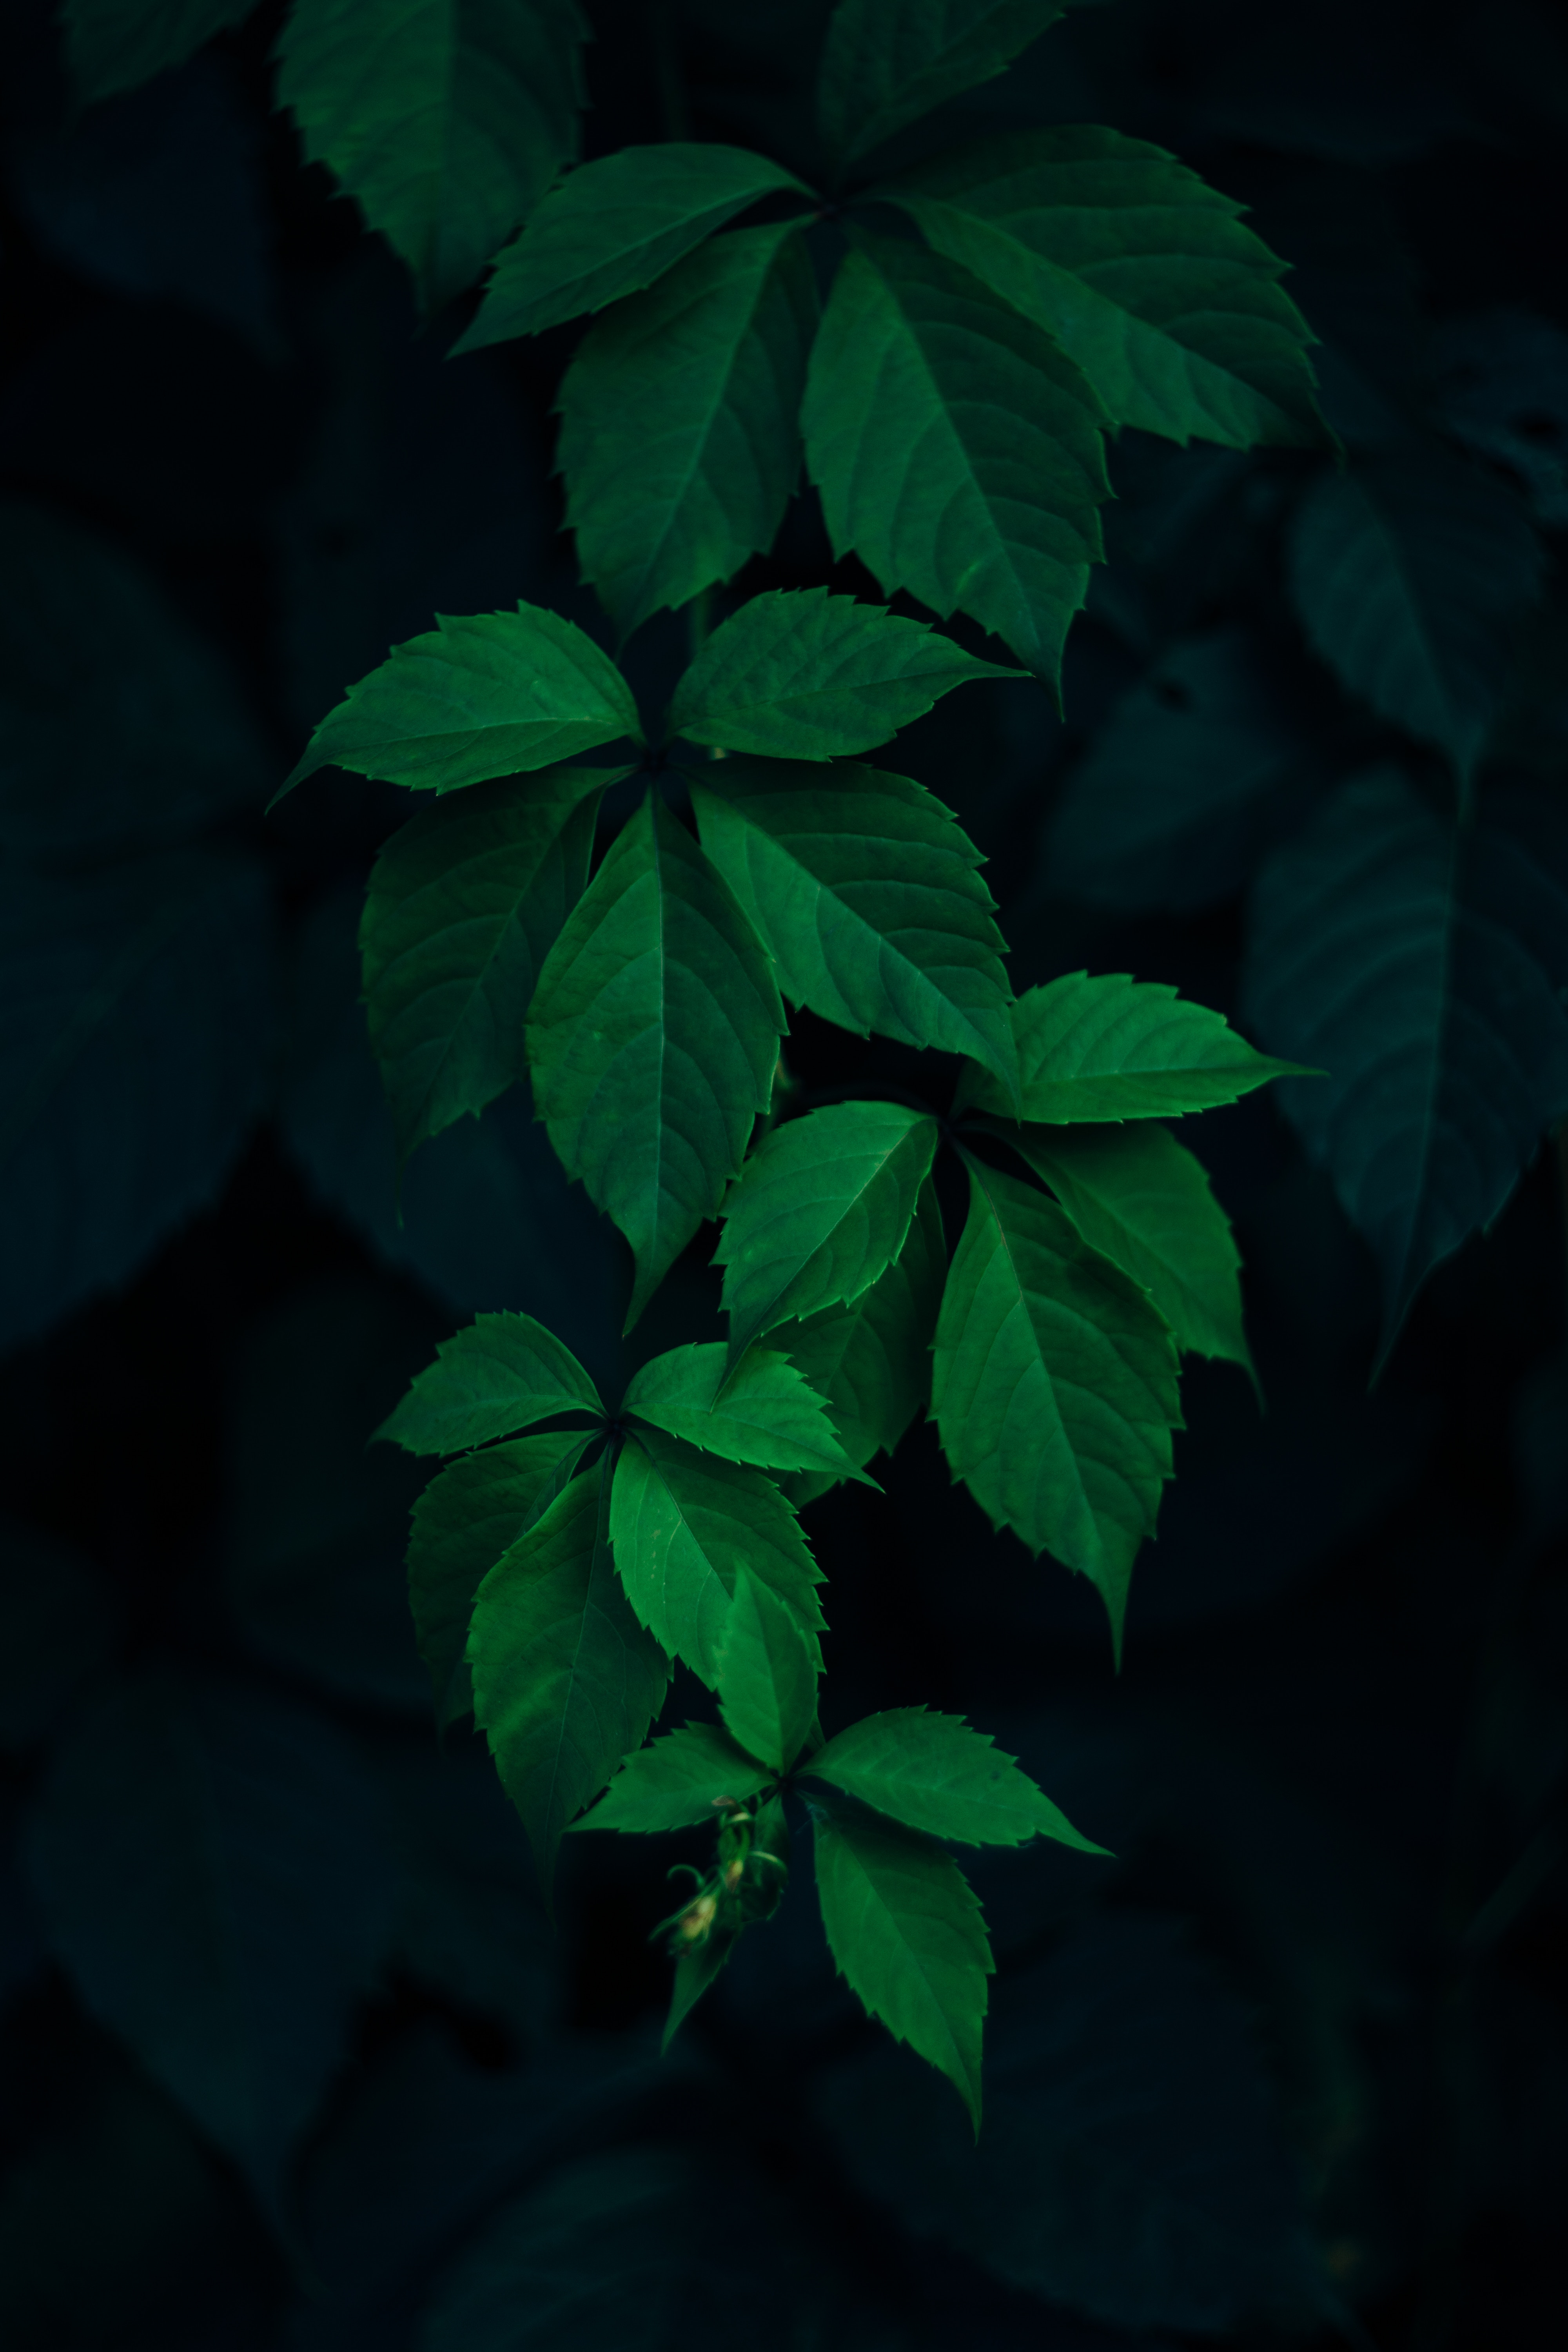 leaves, branches, green, dark background, nature